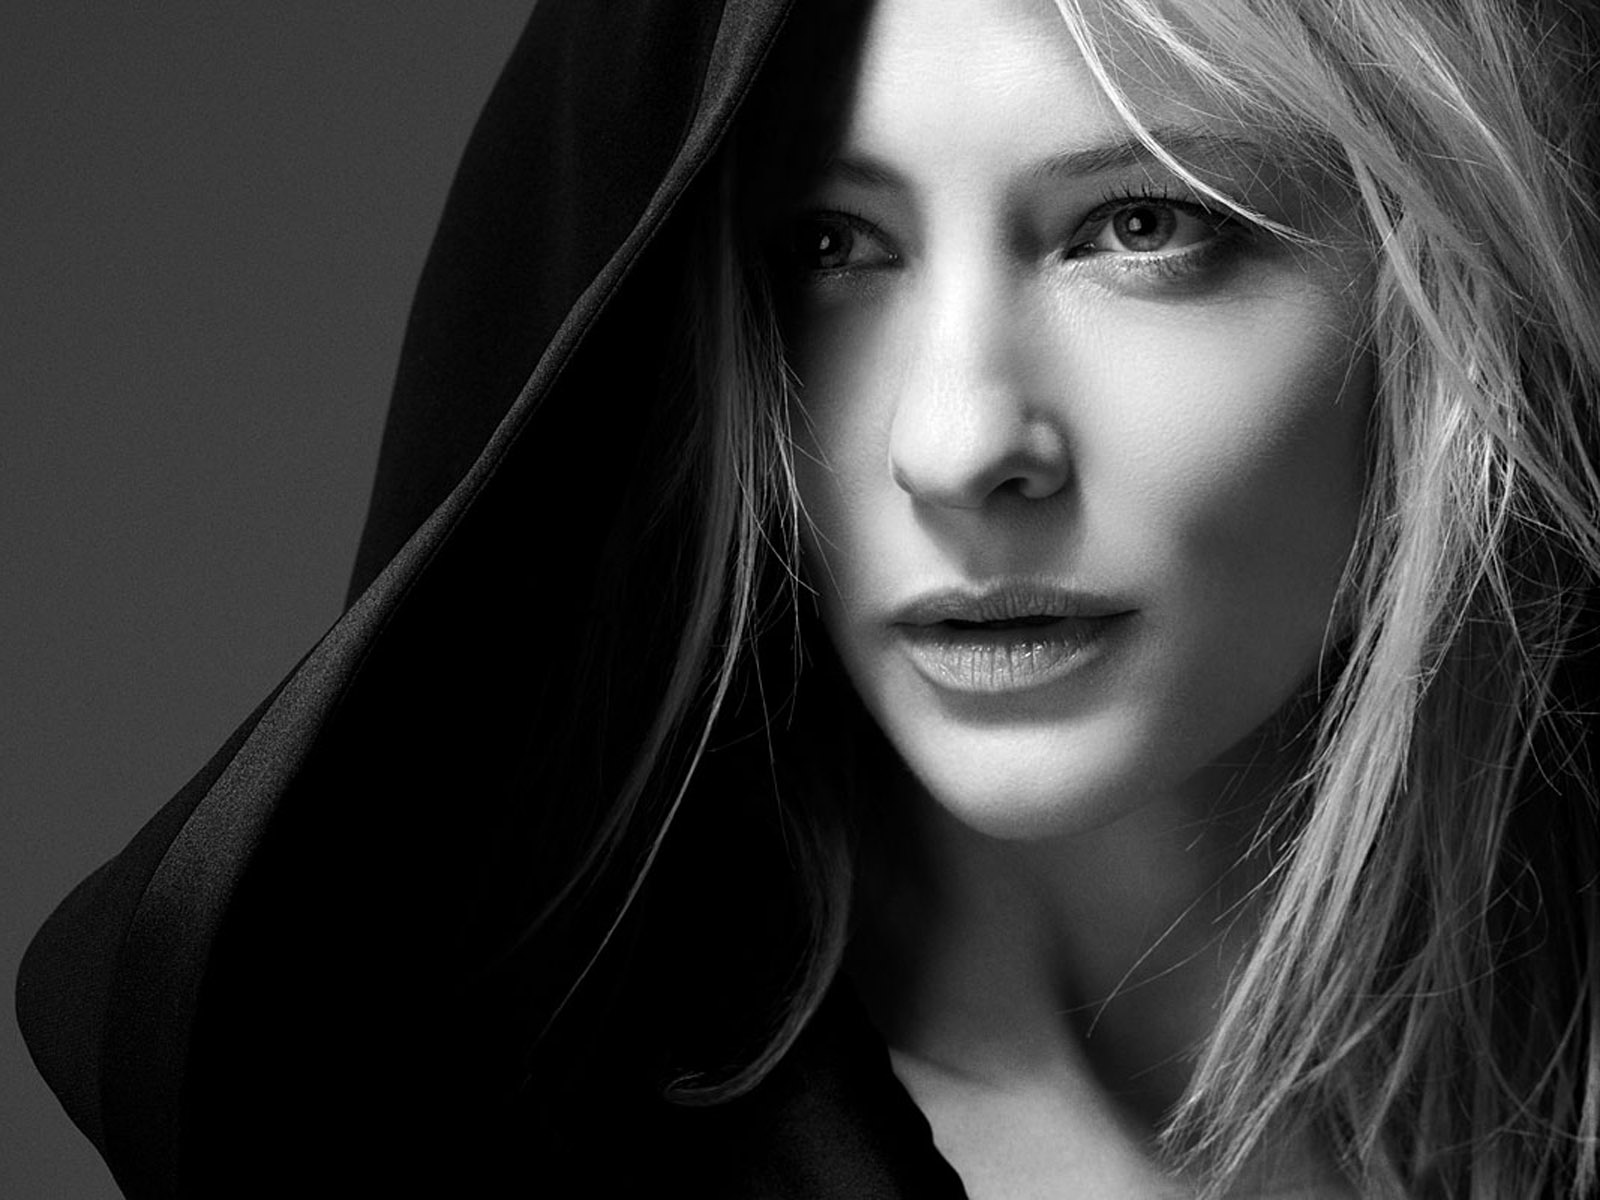 Please check our widescreen hd wallpaper below and bring beauty to your desktop. Cate Blanchett Wallpaper